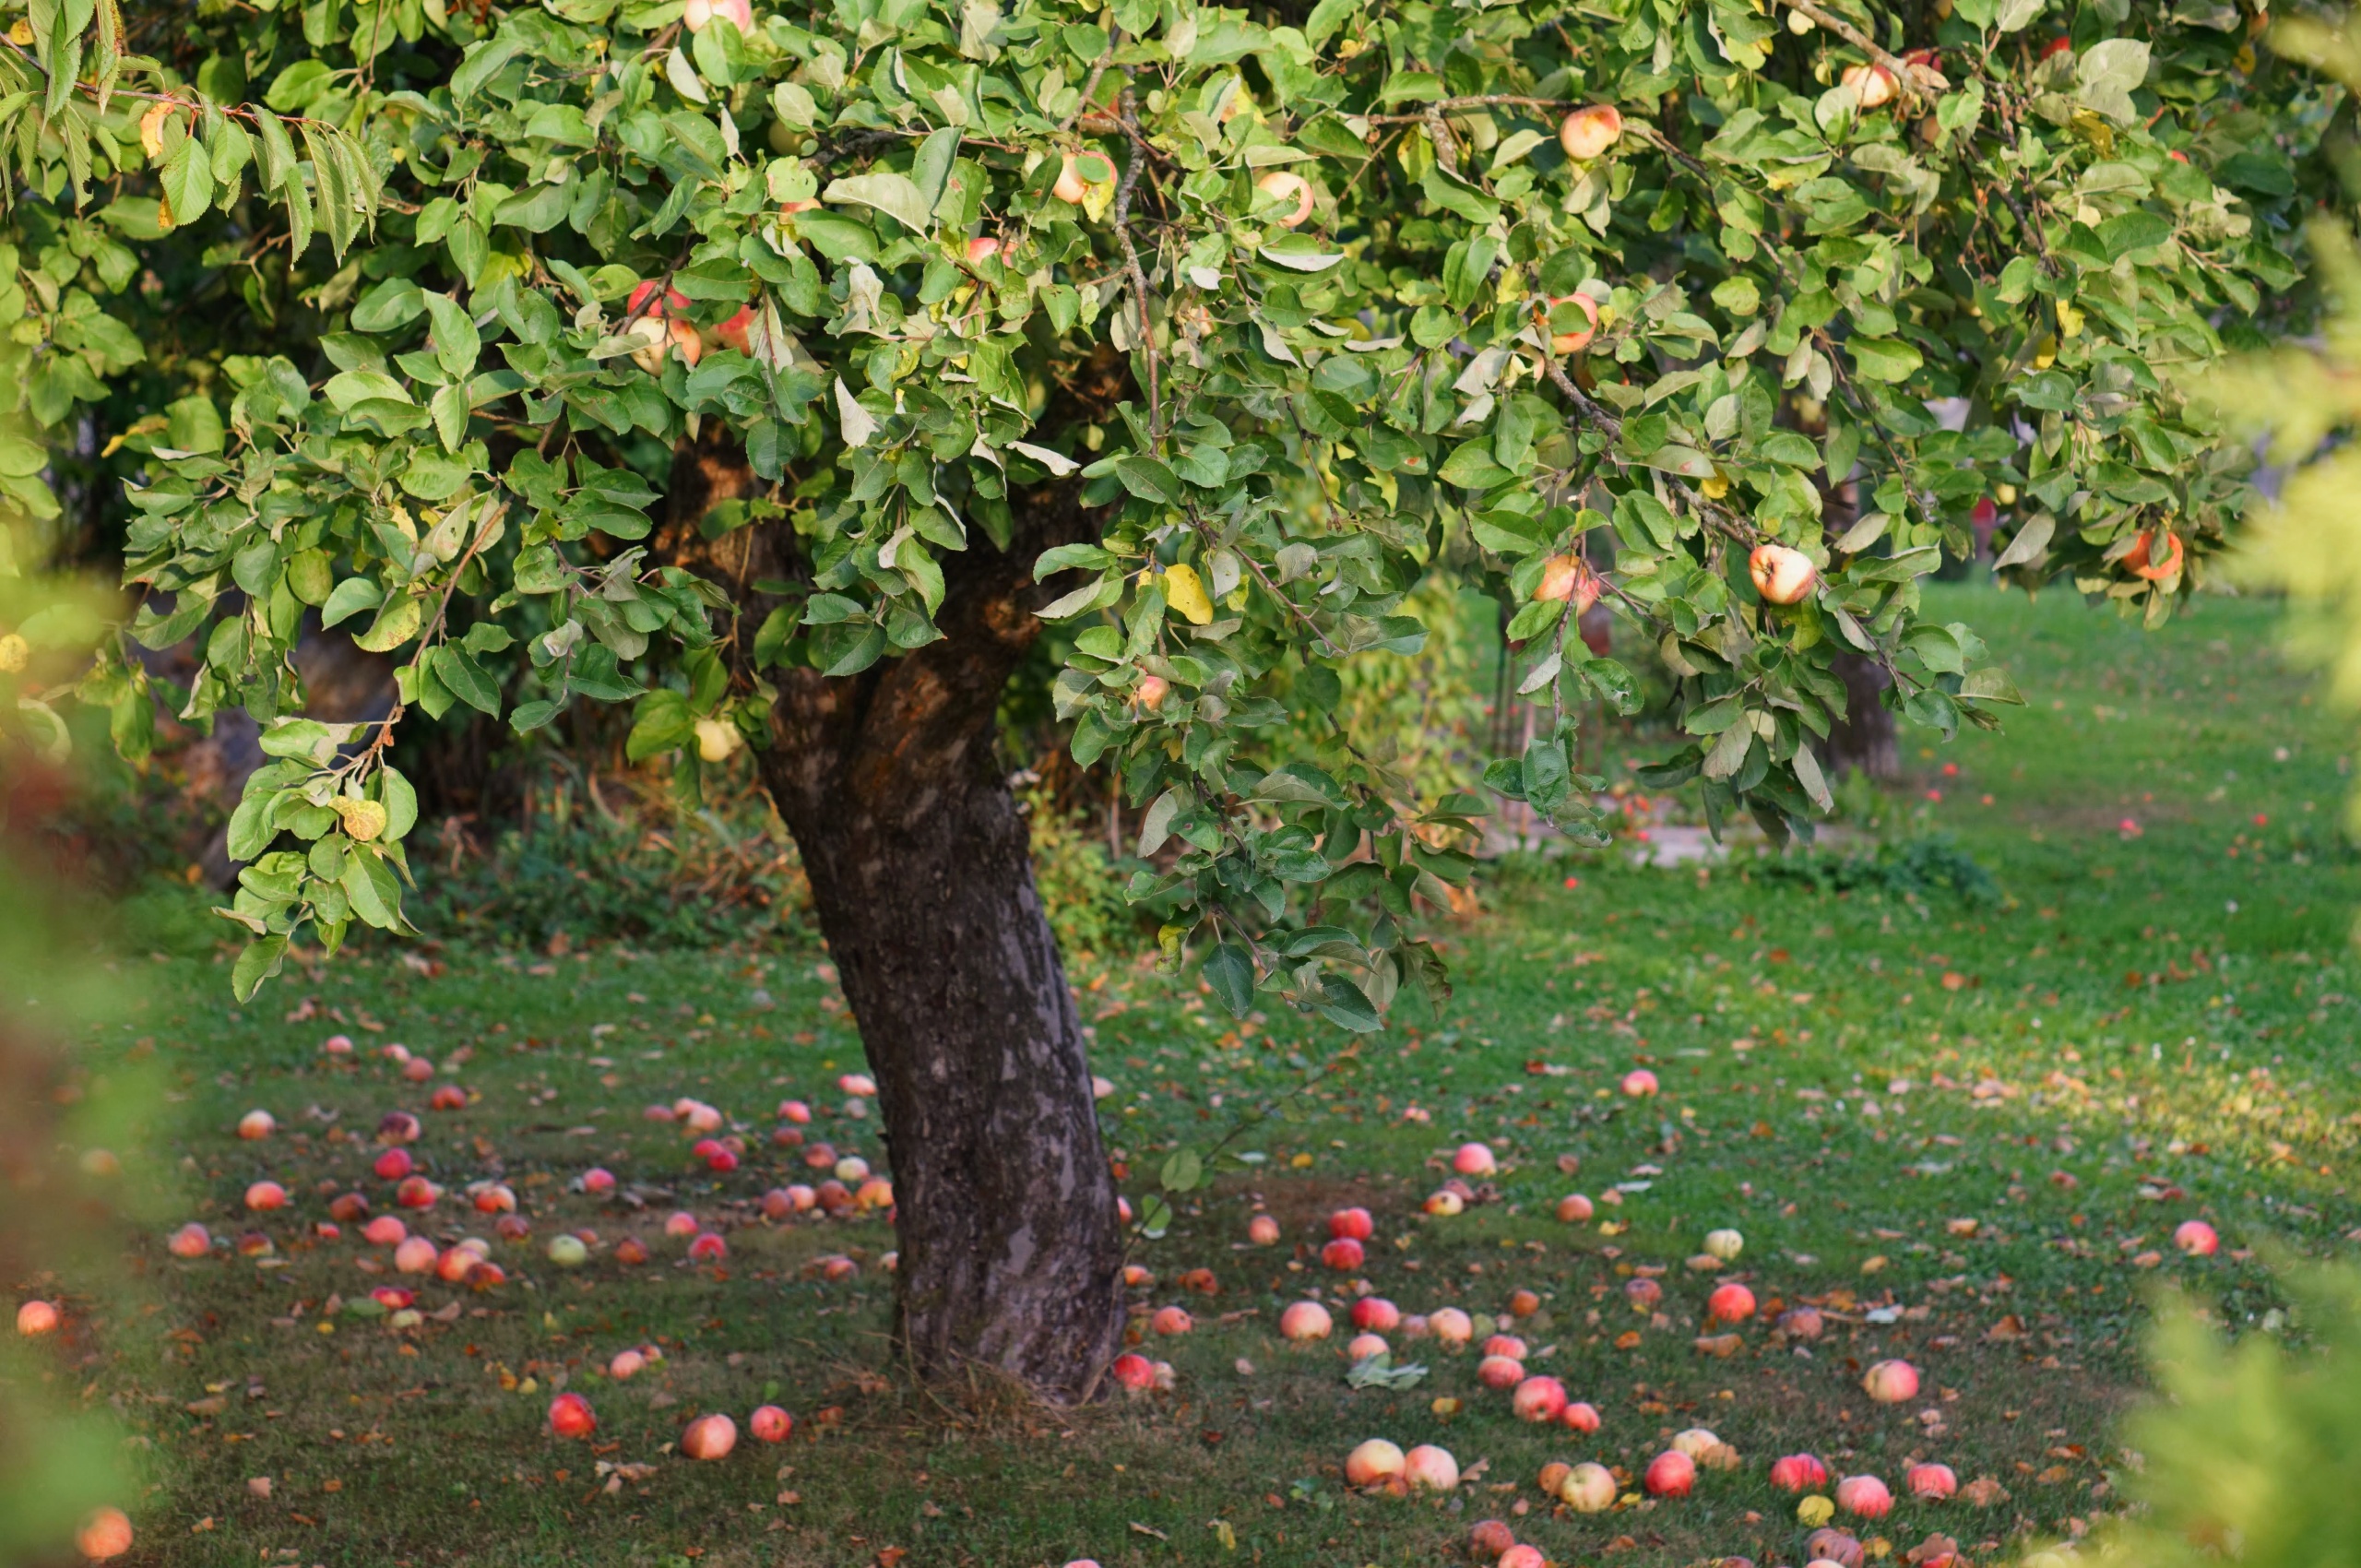 Apples falling from an apple tree